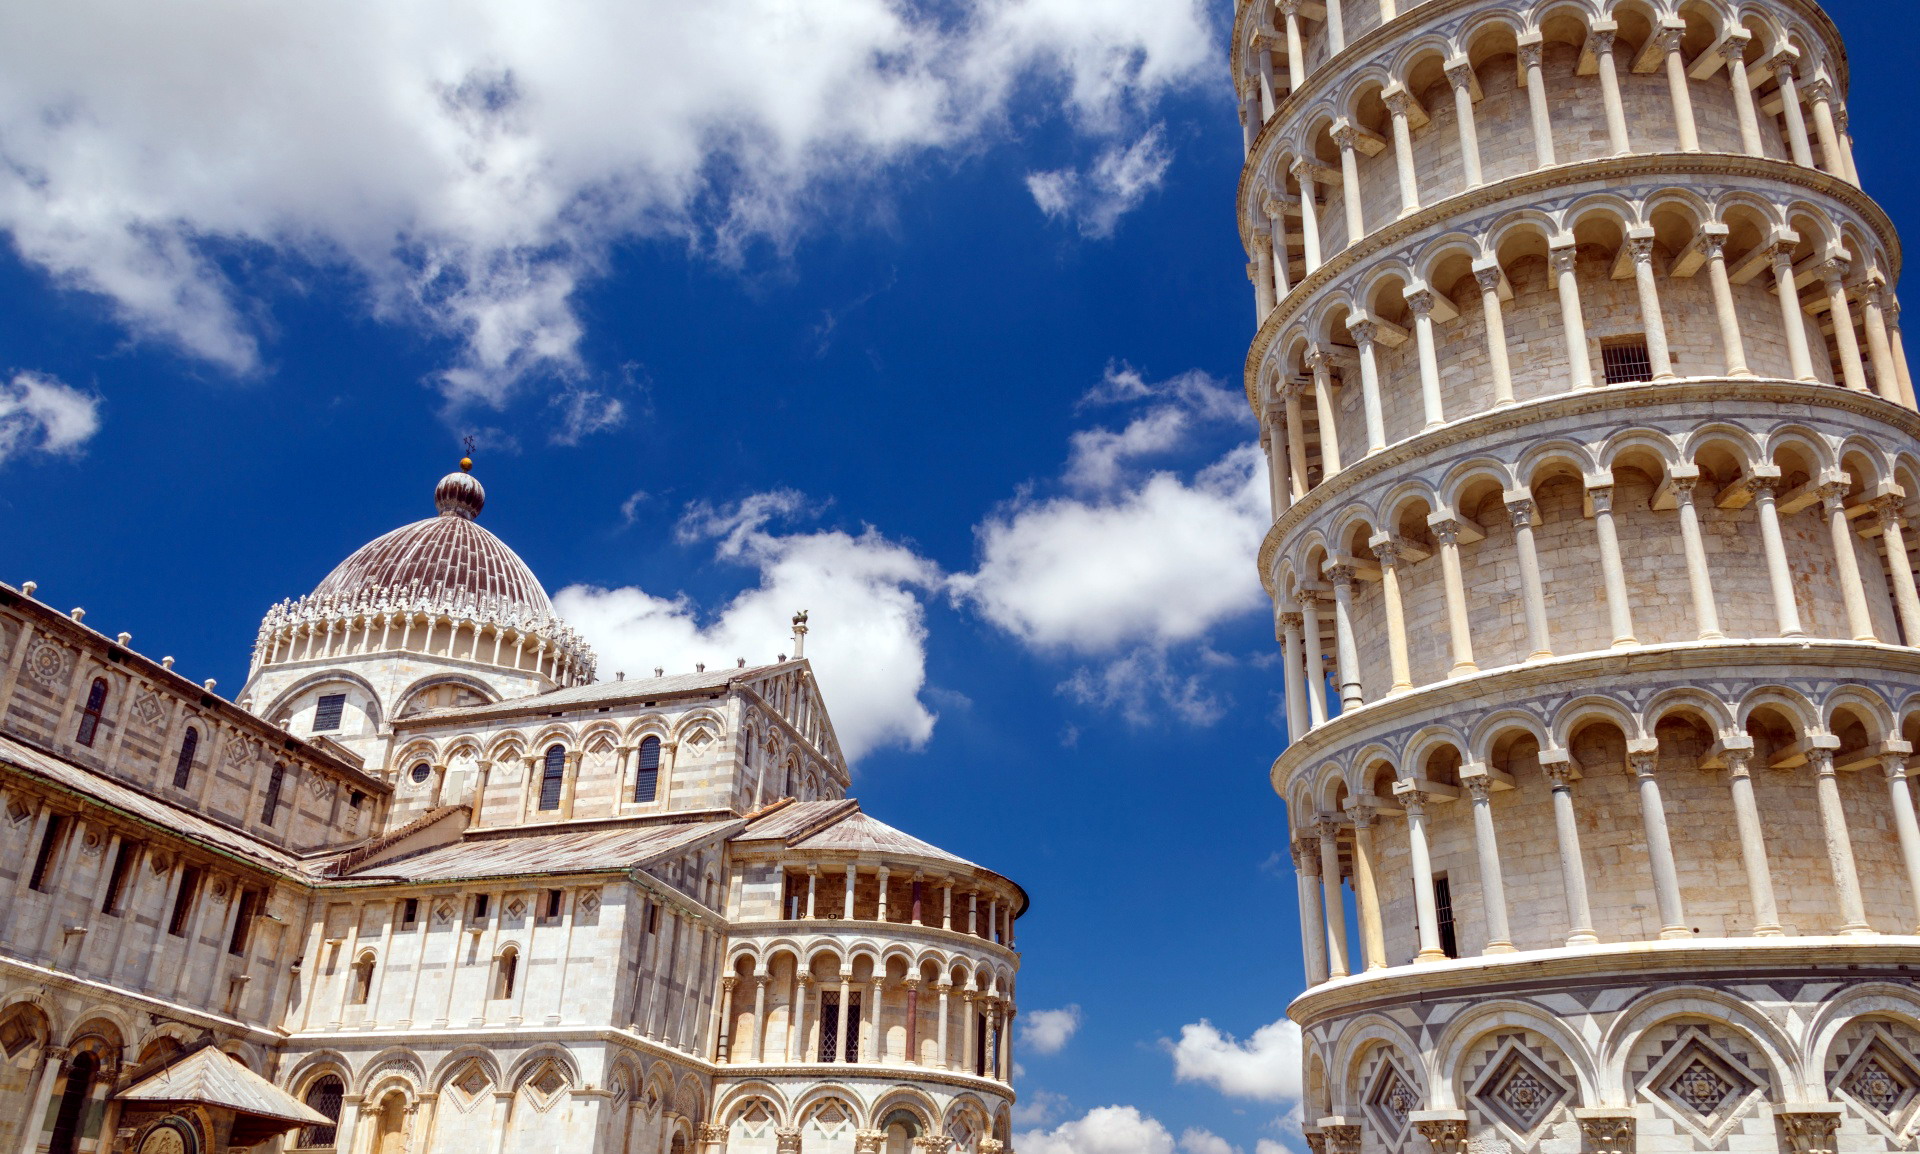 man made, leaning tower of pisa, italy, pisa, monuments